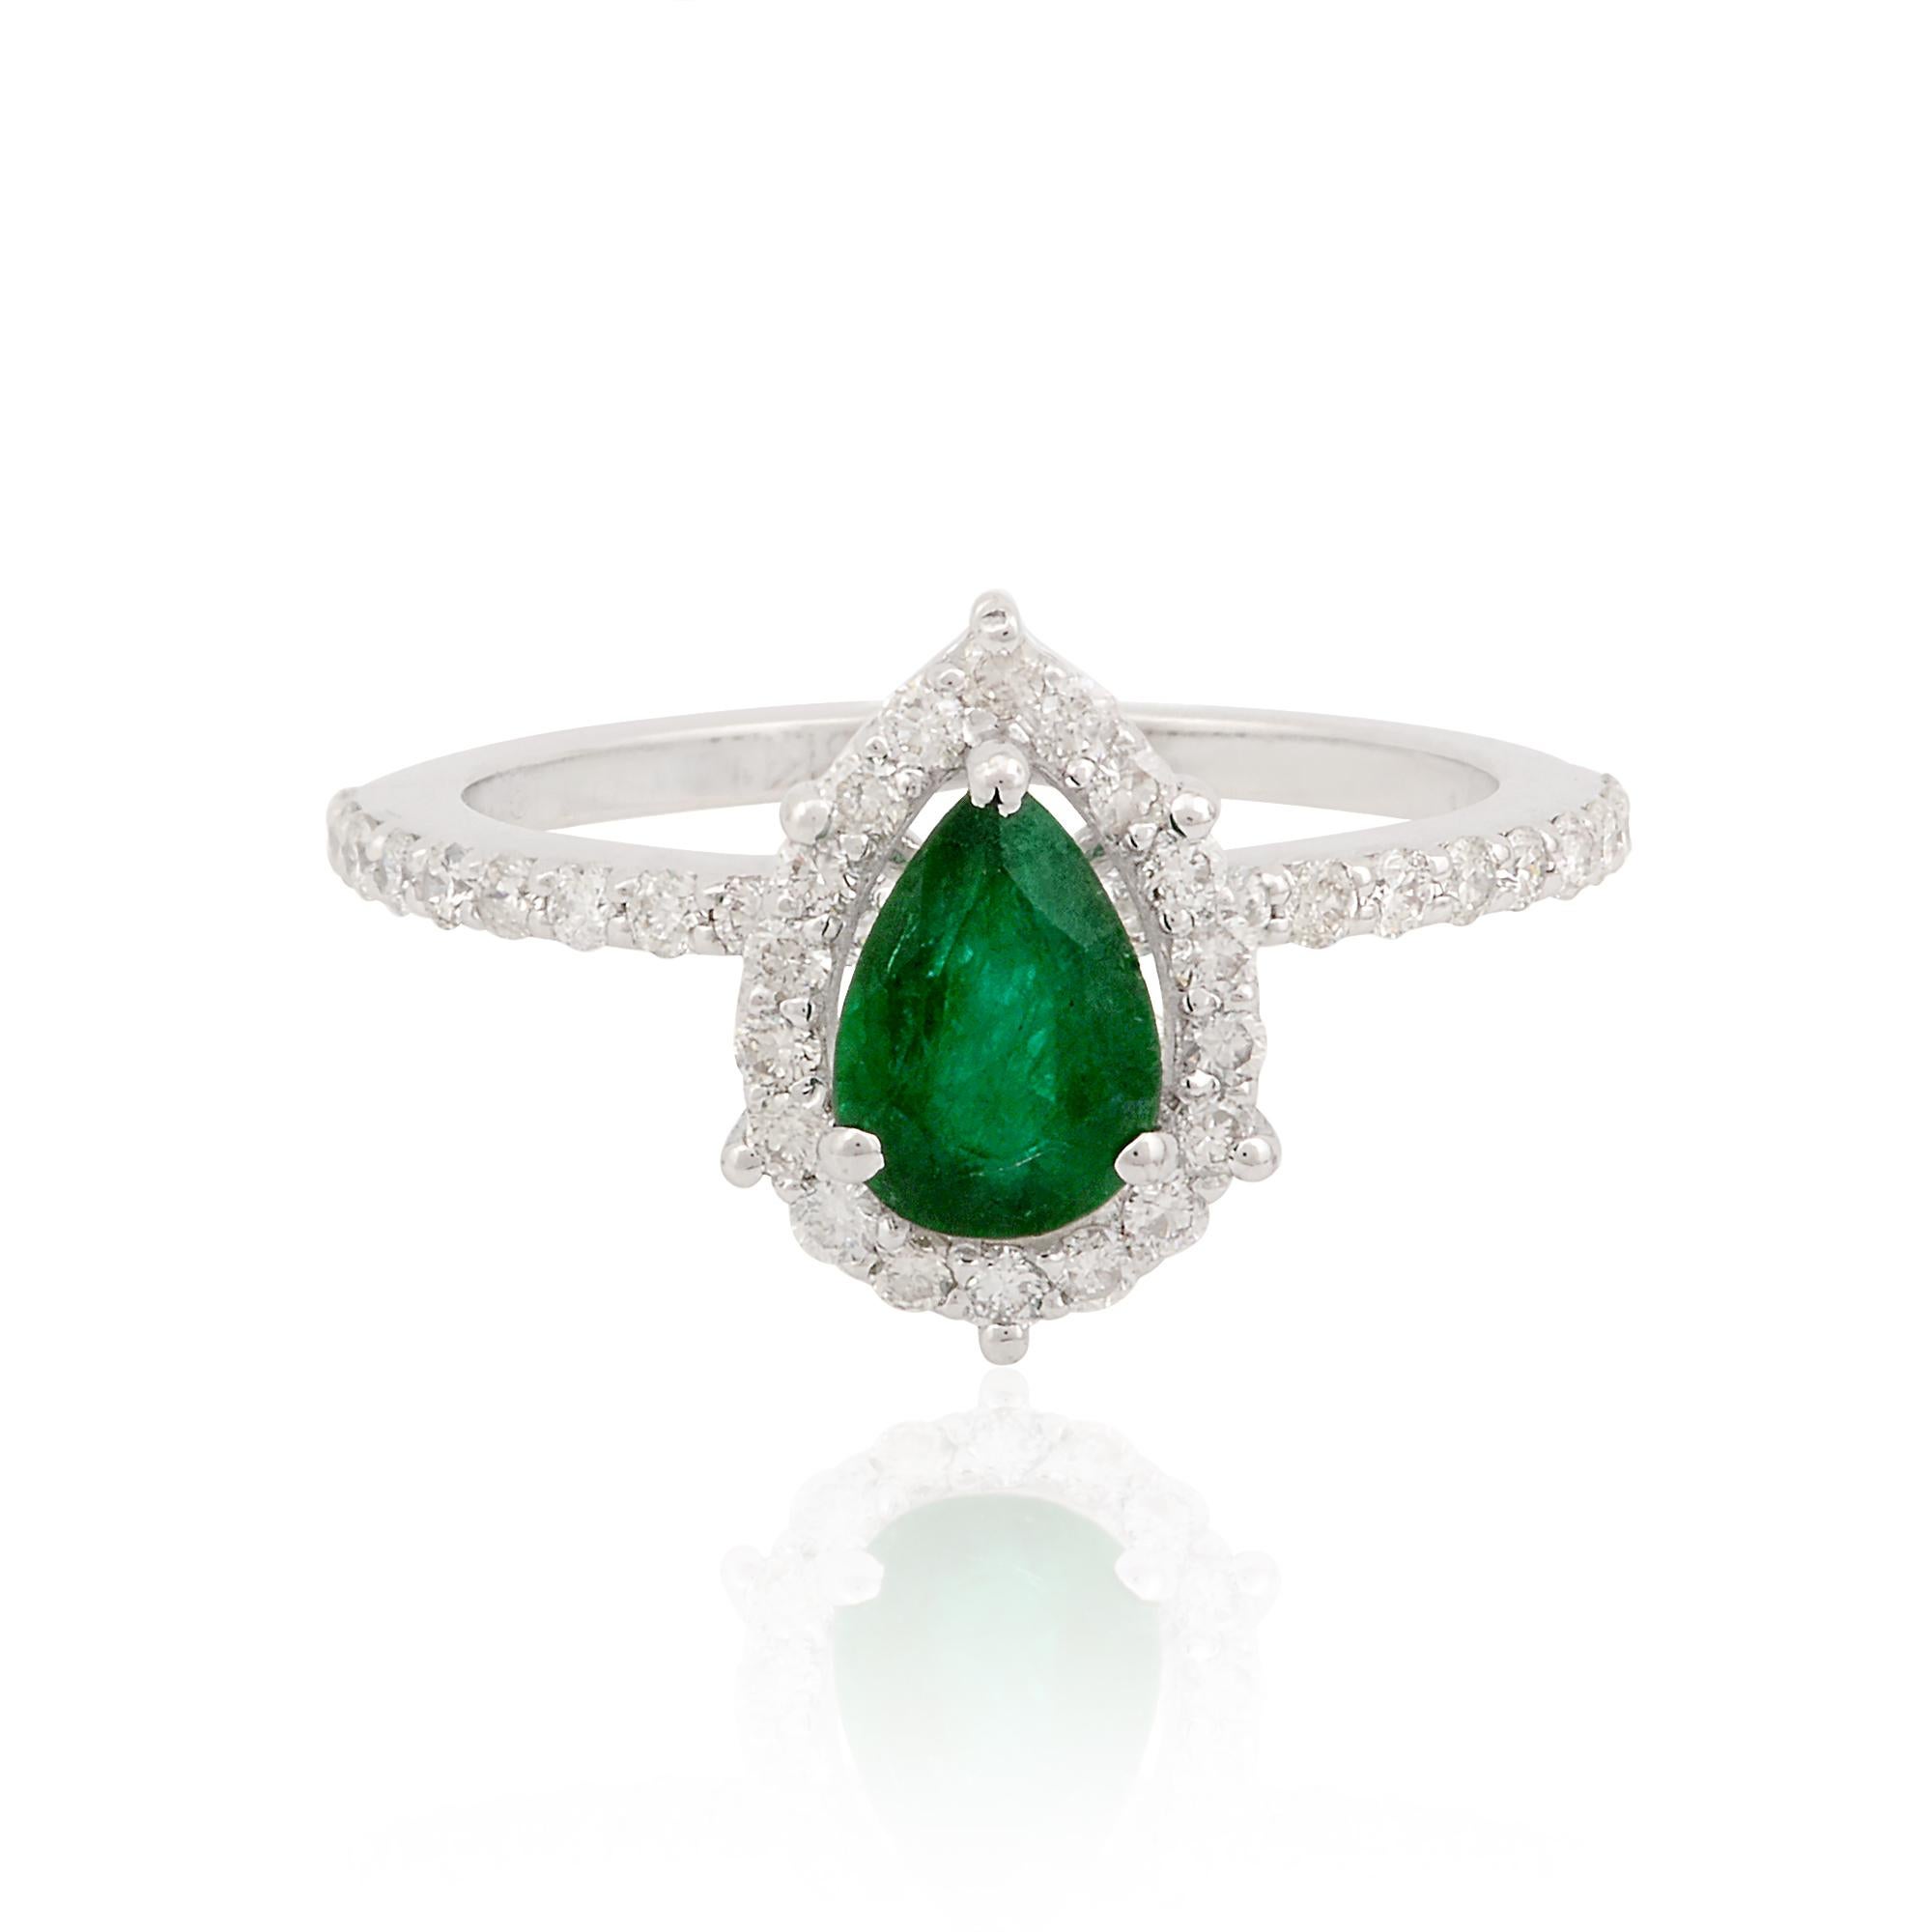 For Sale:  Pear Emerald Gemstone Ring Diamond Pave Solid 18k White Gold Handmade Jewelry 4